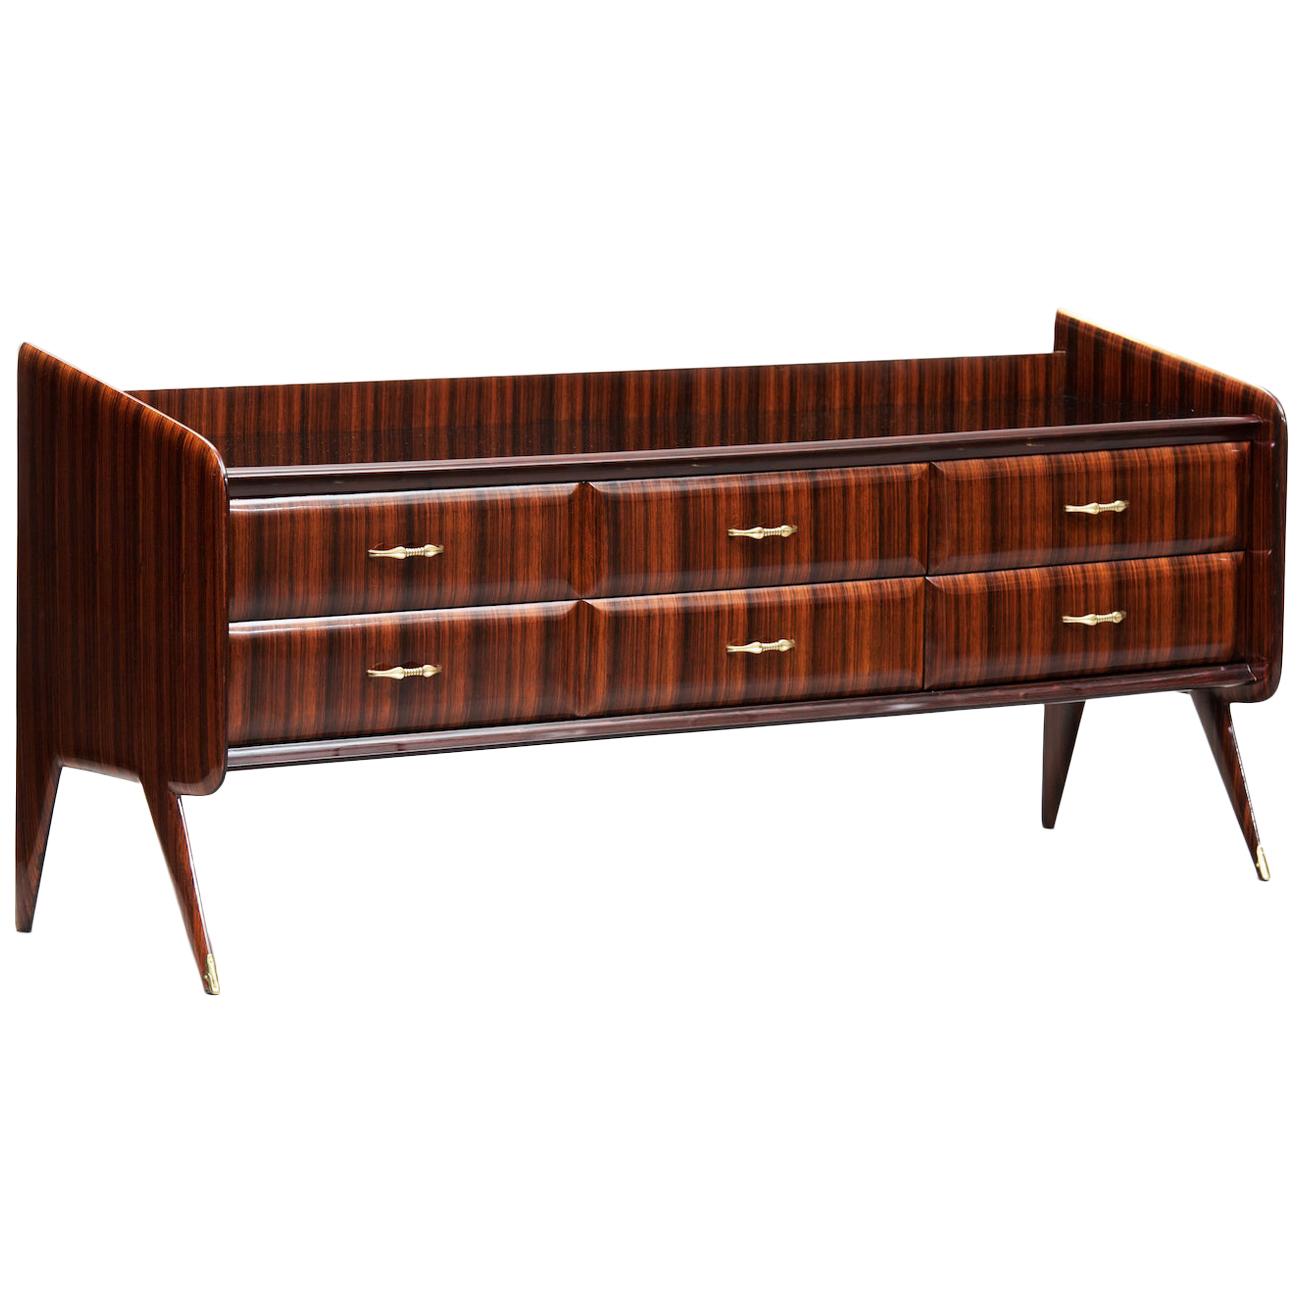 Italian Mid-Century Modern Rosewood Chest of Drawers For Sale